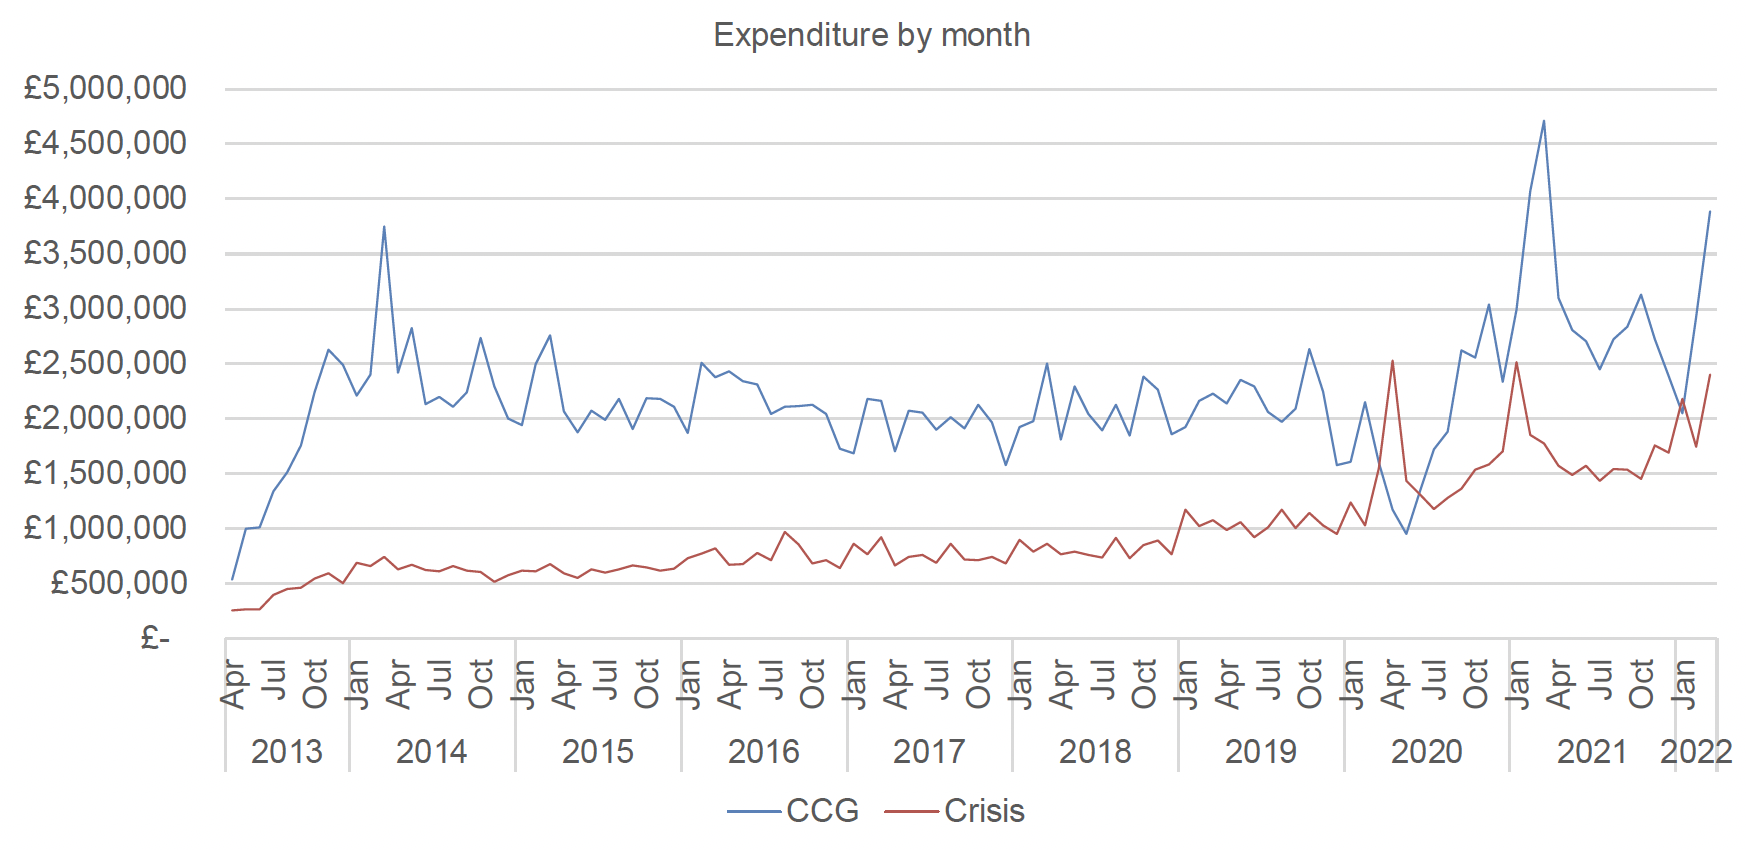 This figure shows a line graph of expenditure per month broken down by CCG and Crisis Grants, covering the period 2013 to Jan 2022. The main trends are reported in the text. 